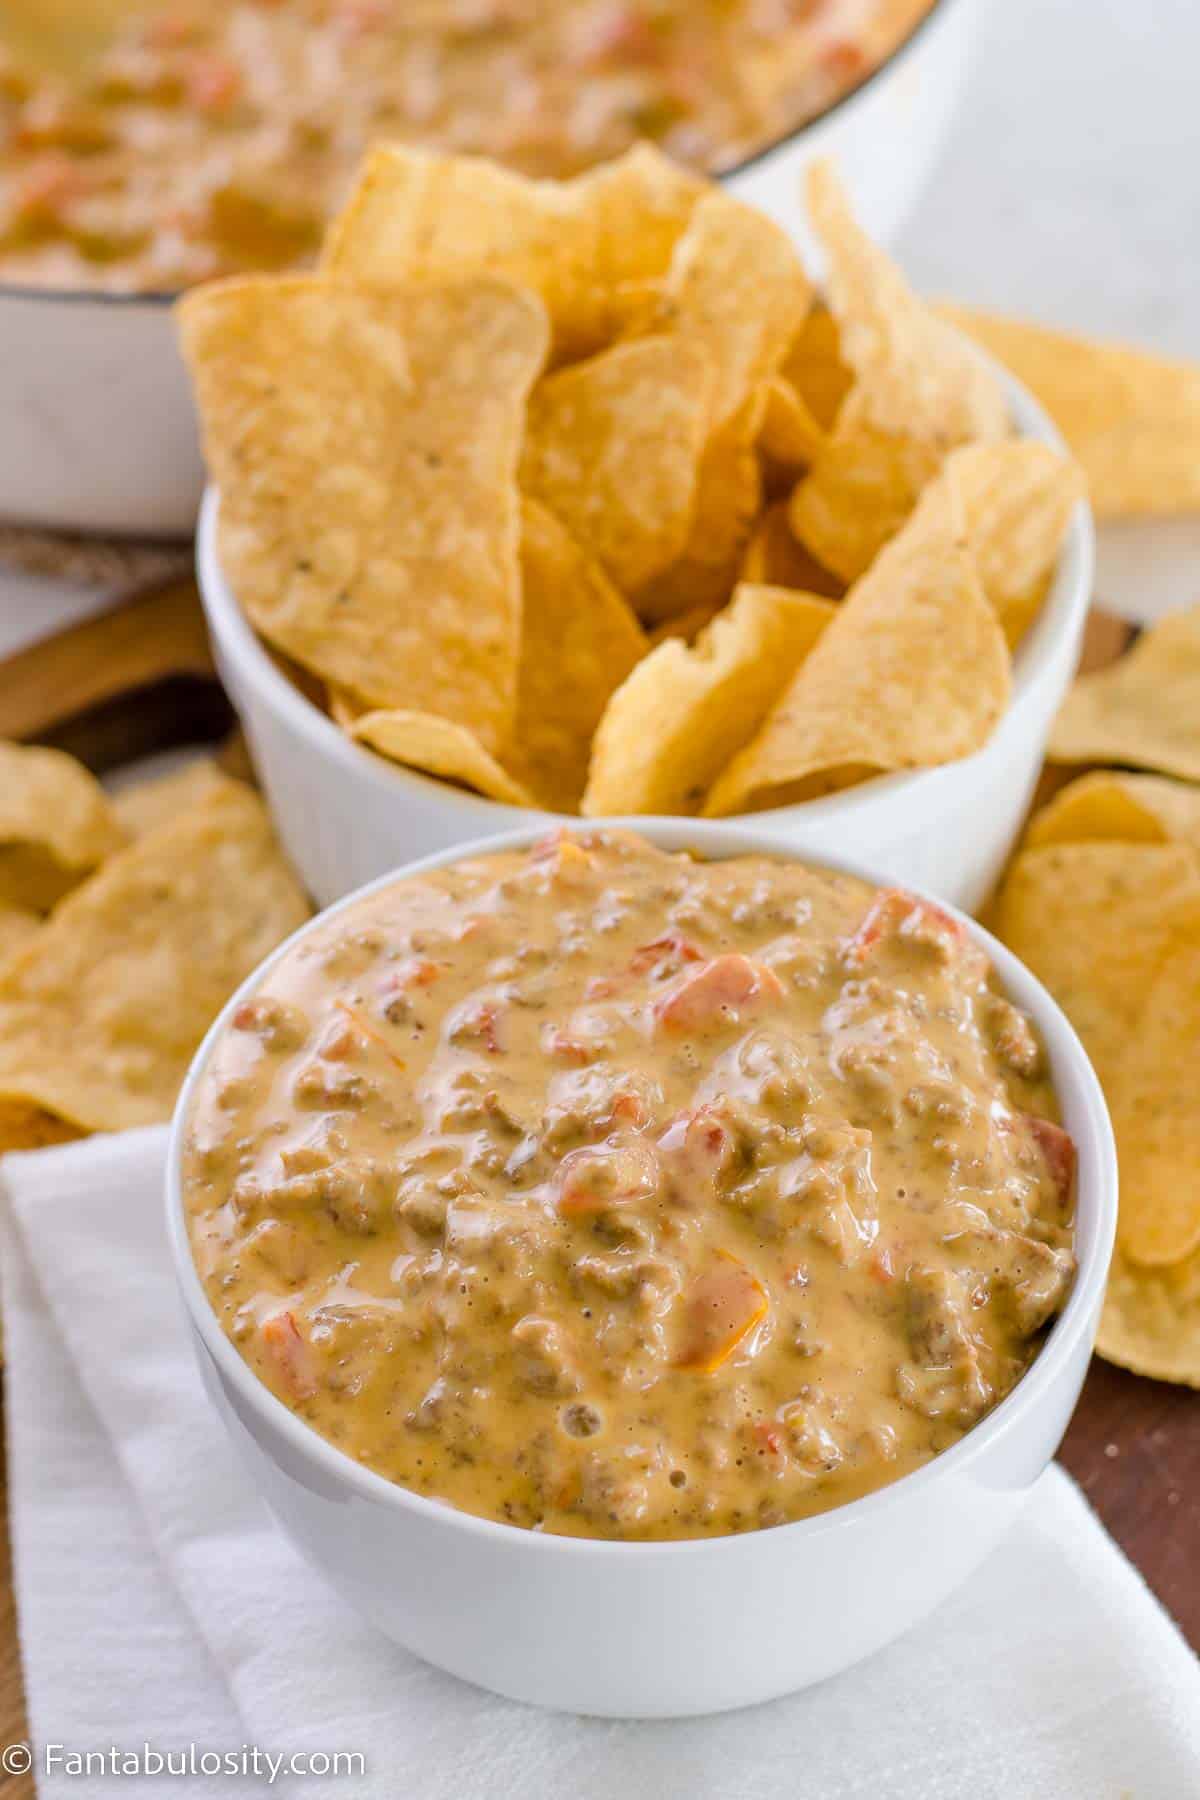 Rotel dip in a white bowl, next to a bowl of tortilla chips.